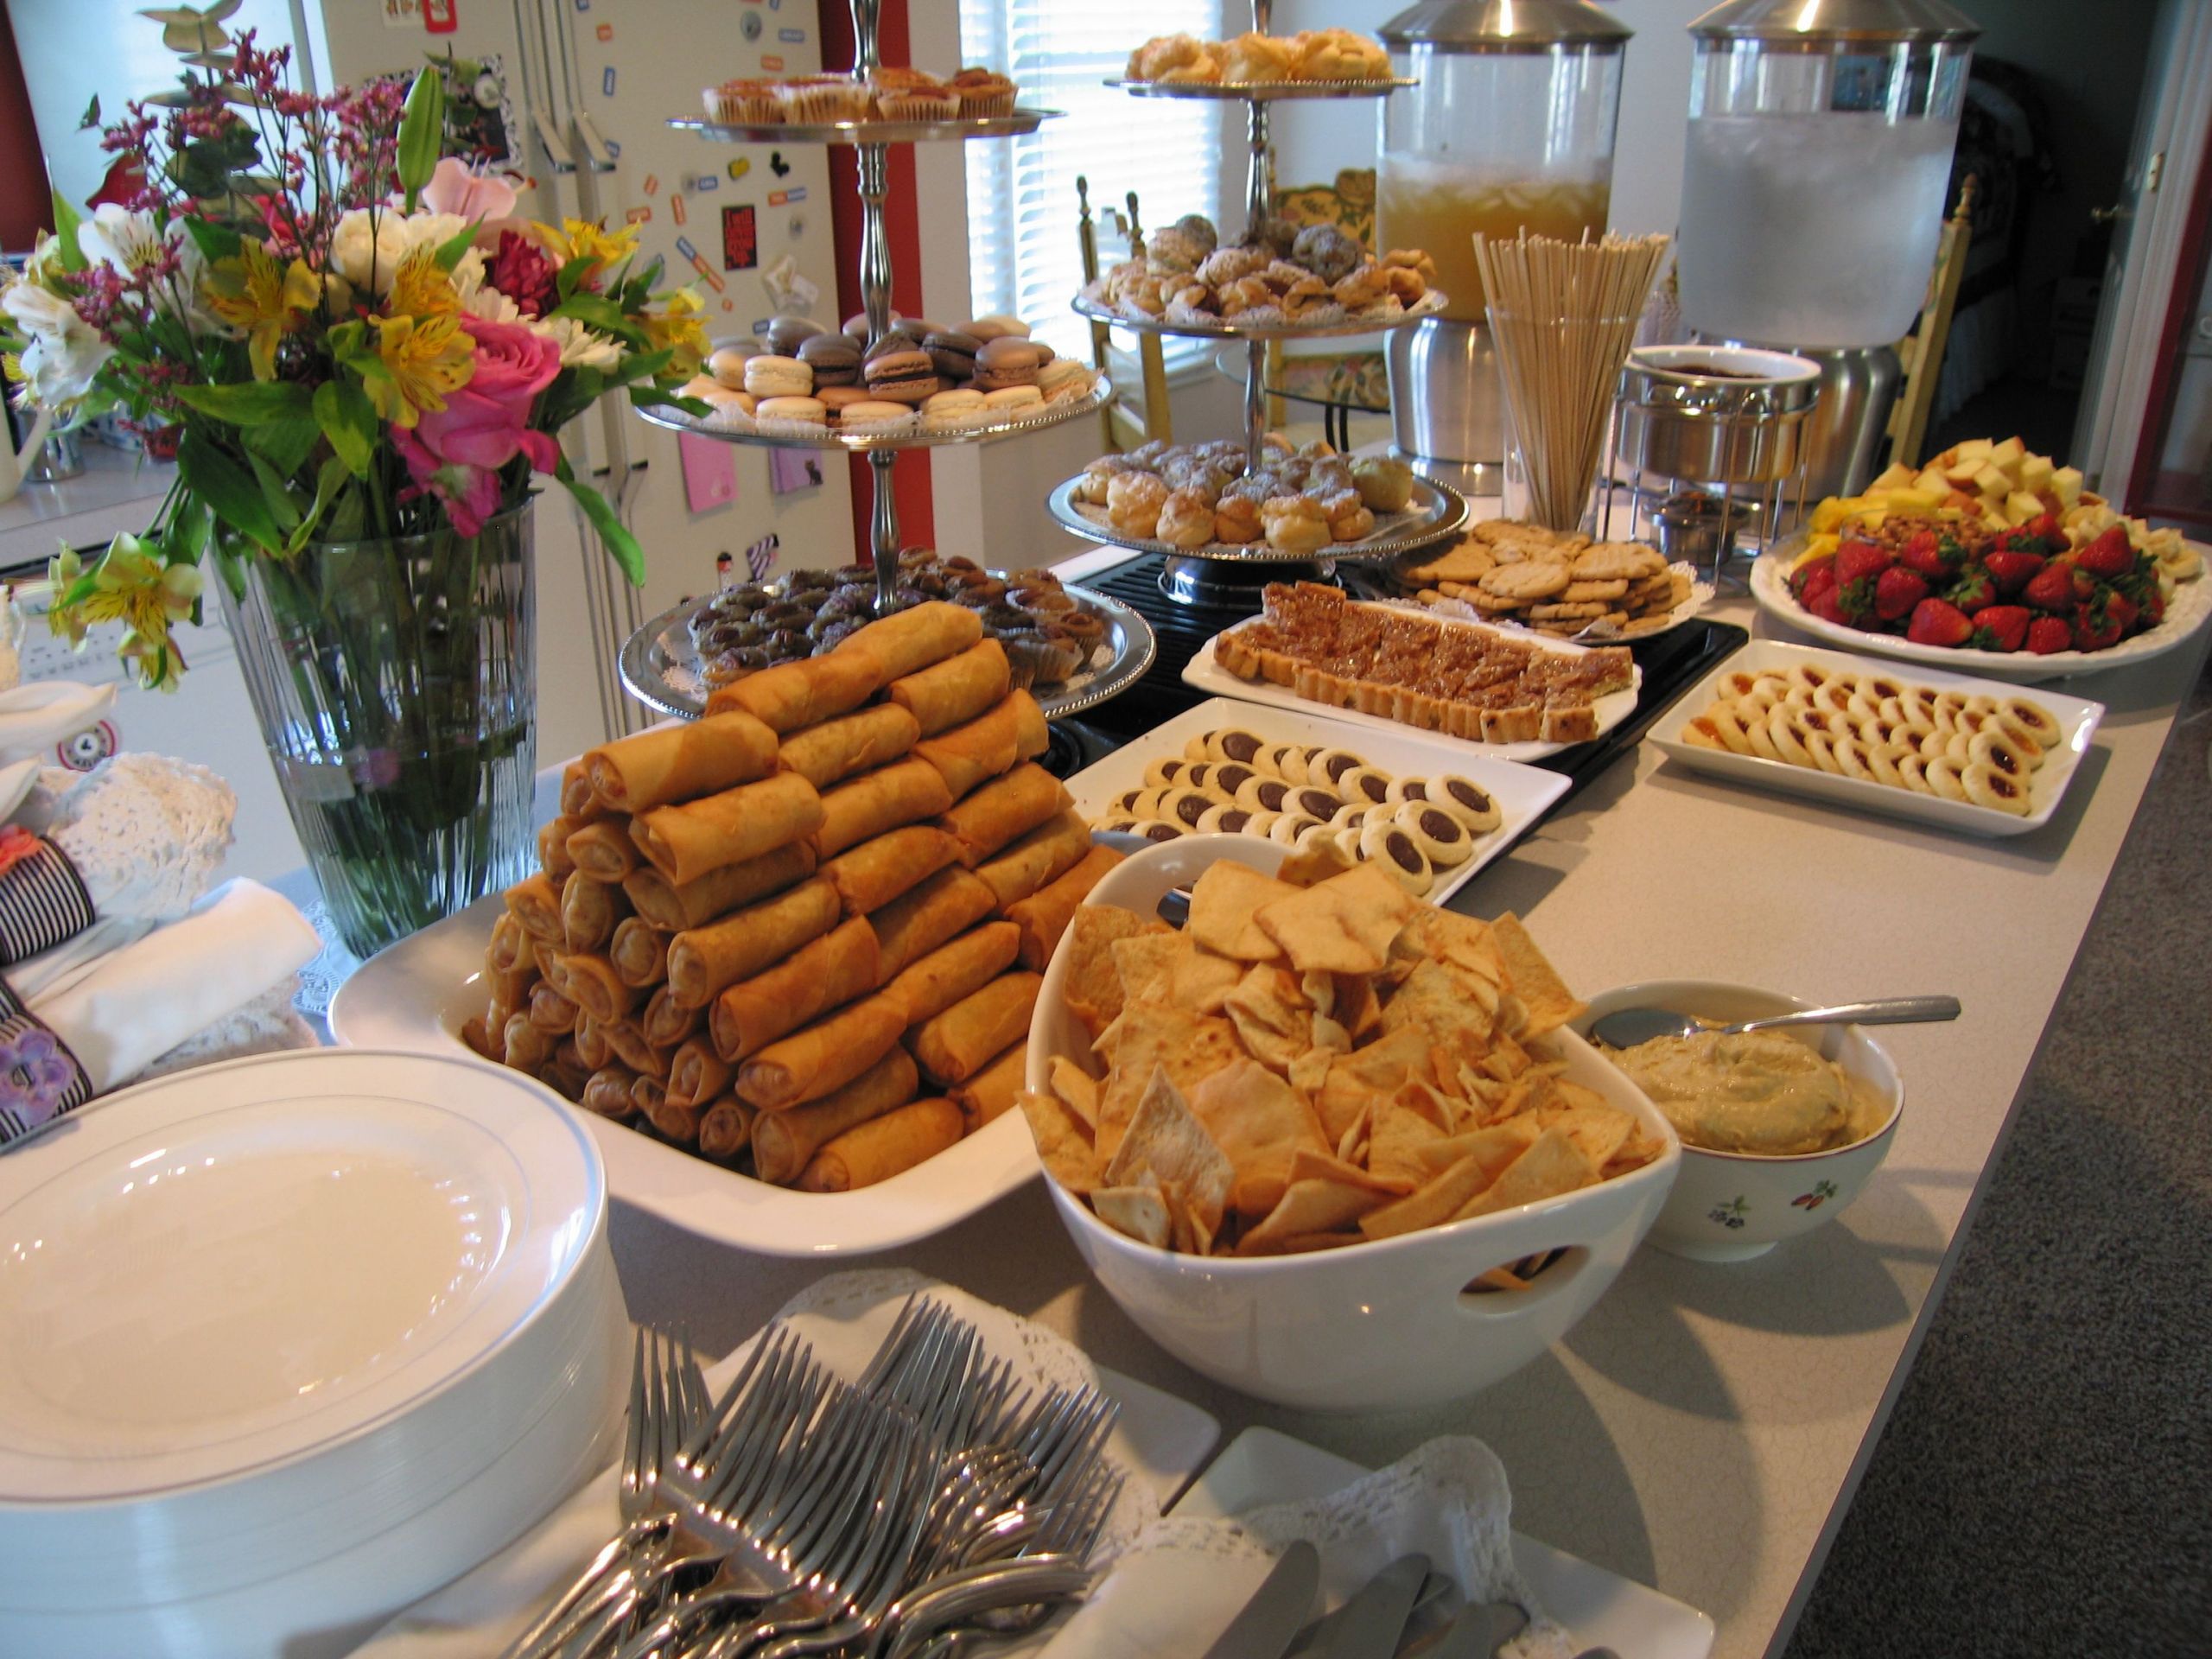 Party Food Display Ideas
 A simple and elegant food display on a small kitchen